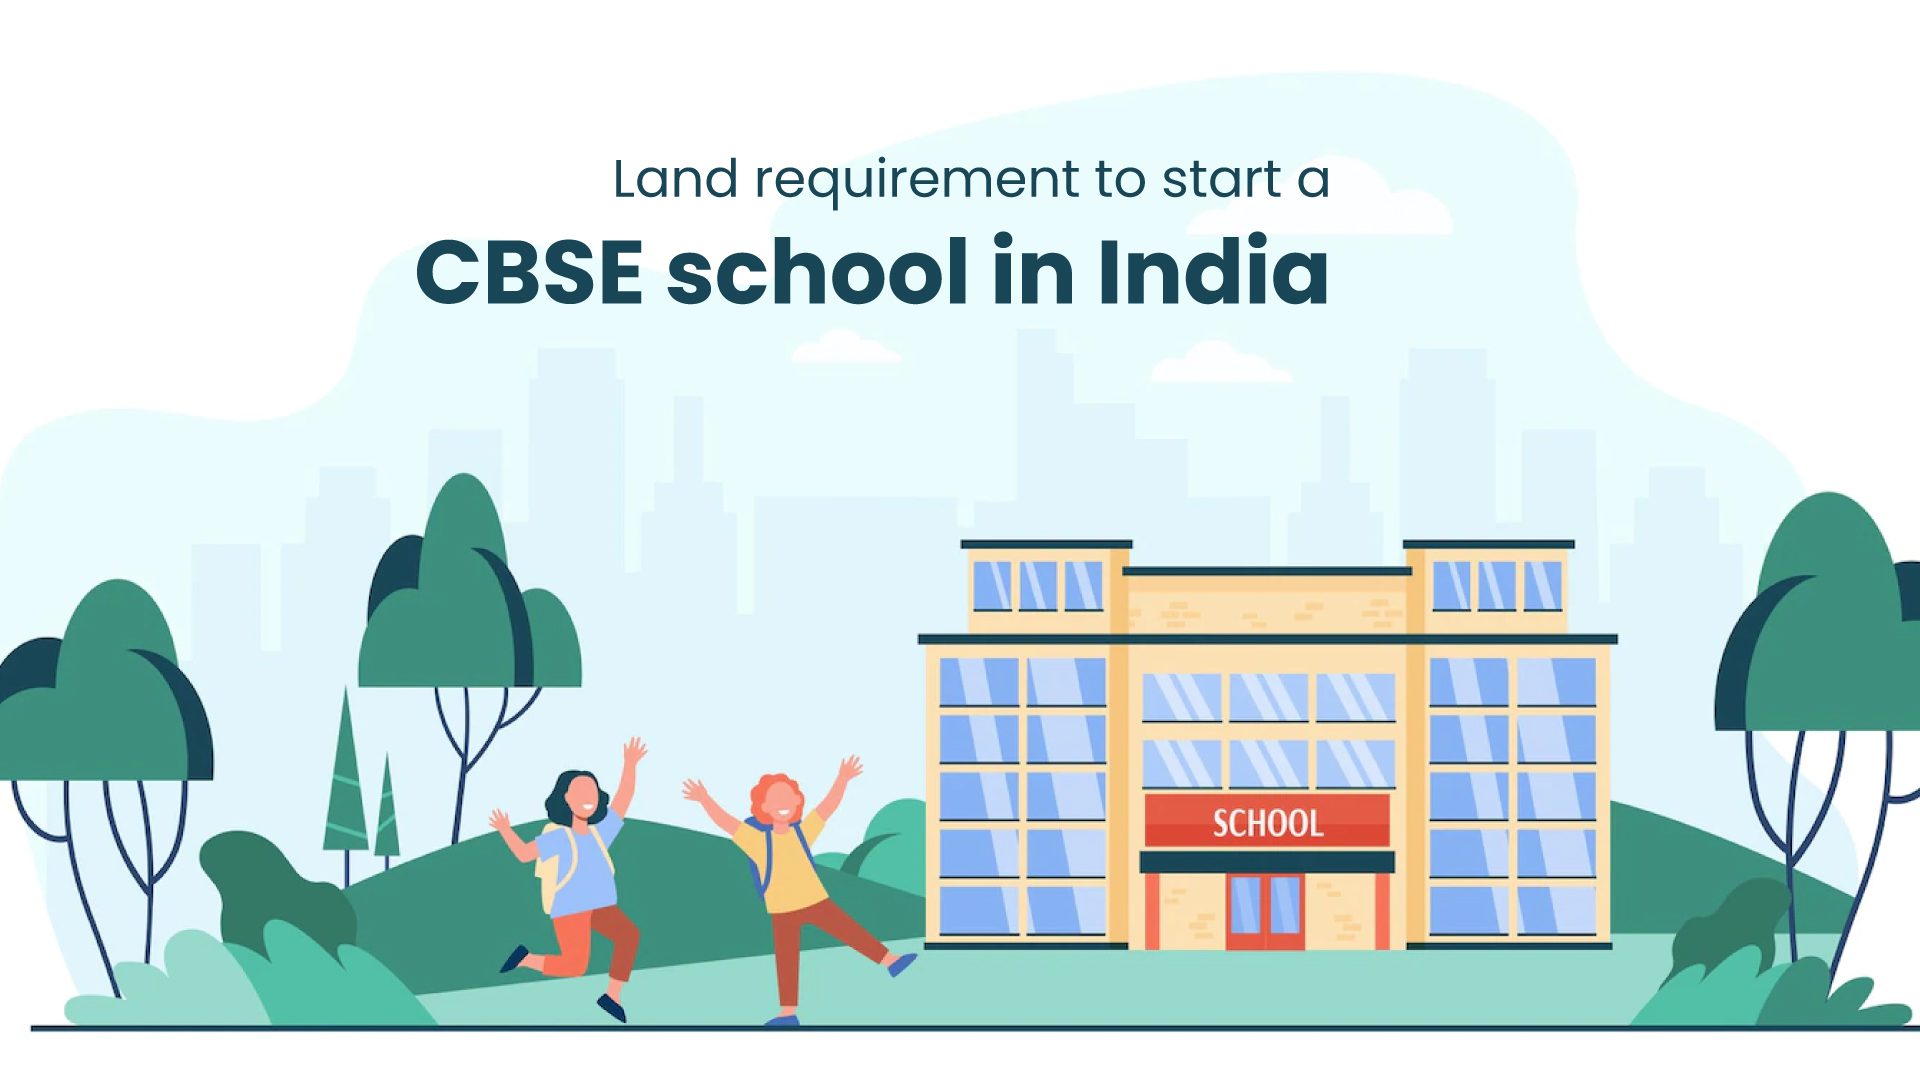 Land requirement to start a CBSE school in India